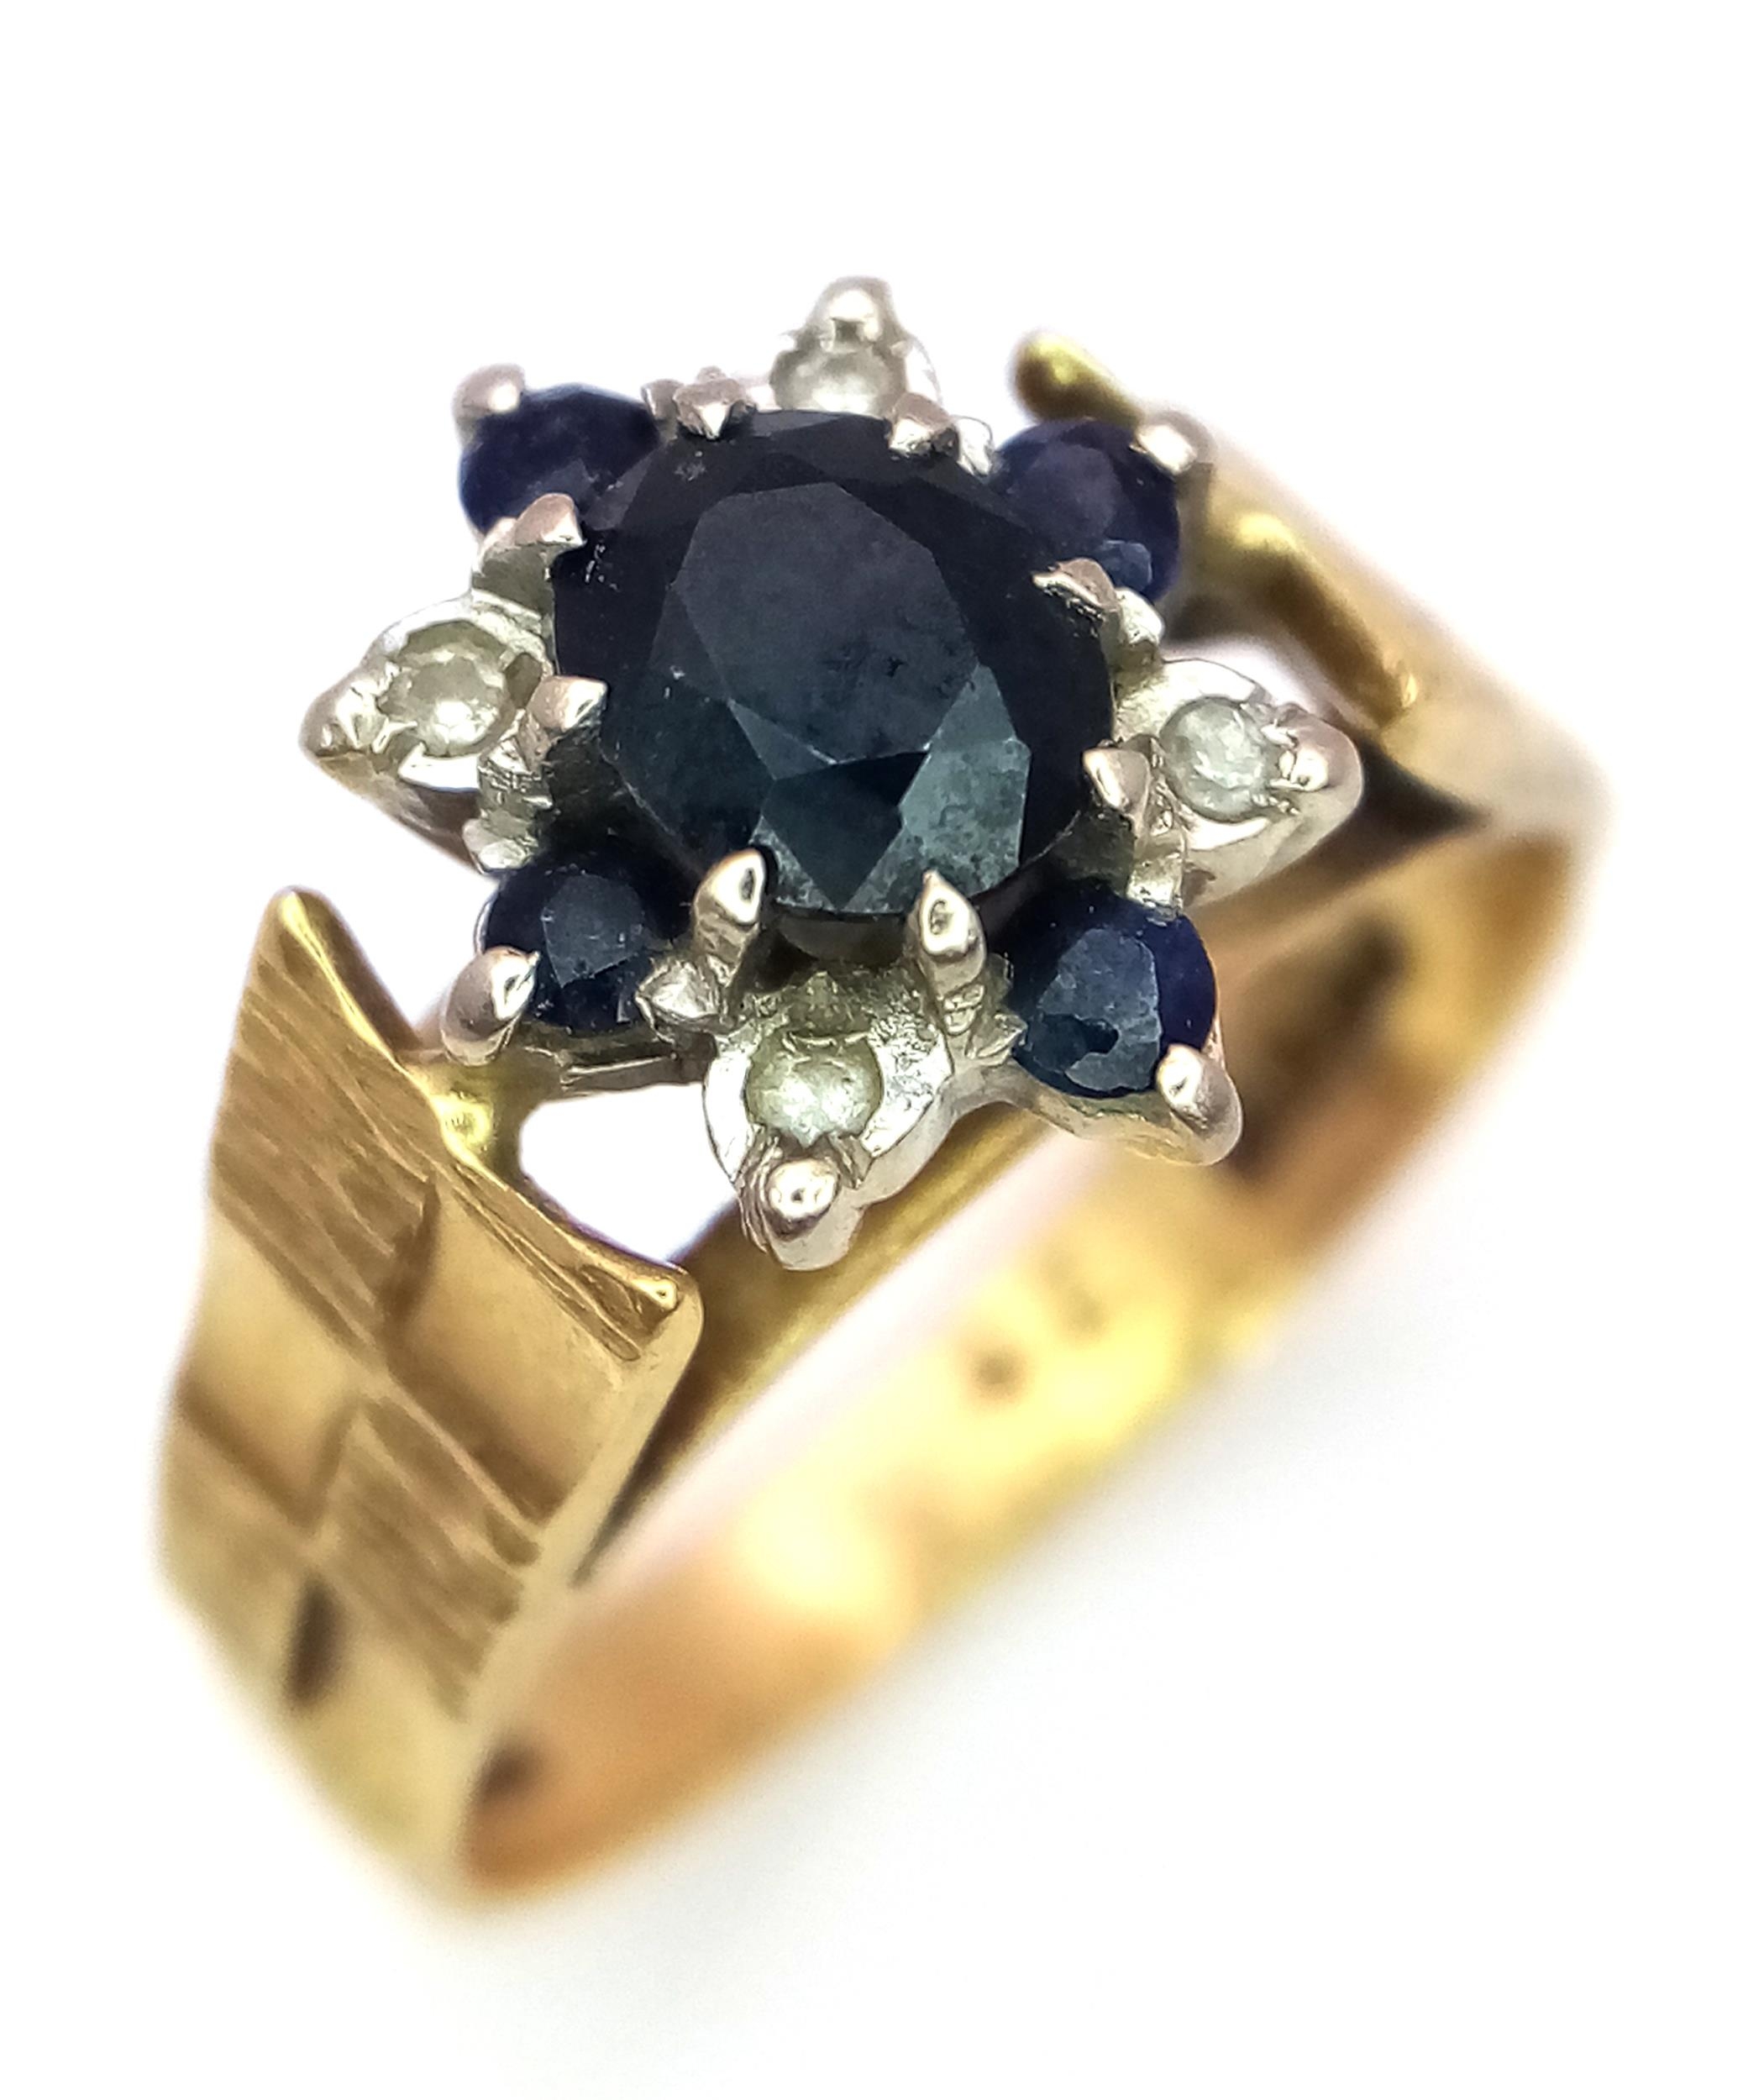 A Vintage 9K Yellow Gold Sapphire and Diamond Signet Ring. Size J 1/2. 4.4g total weight.